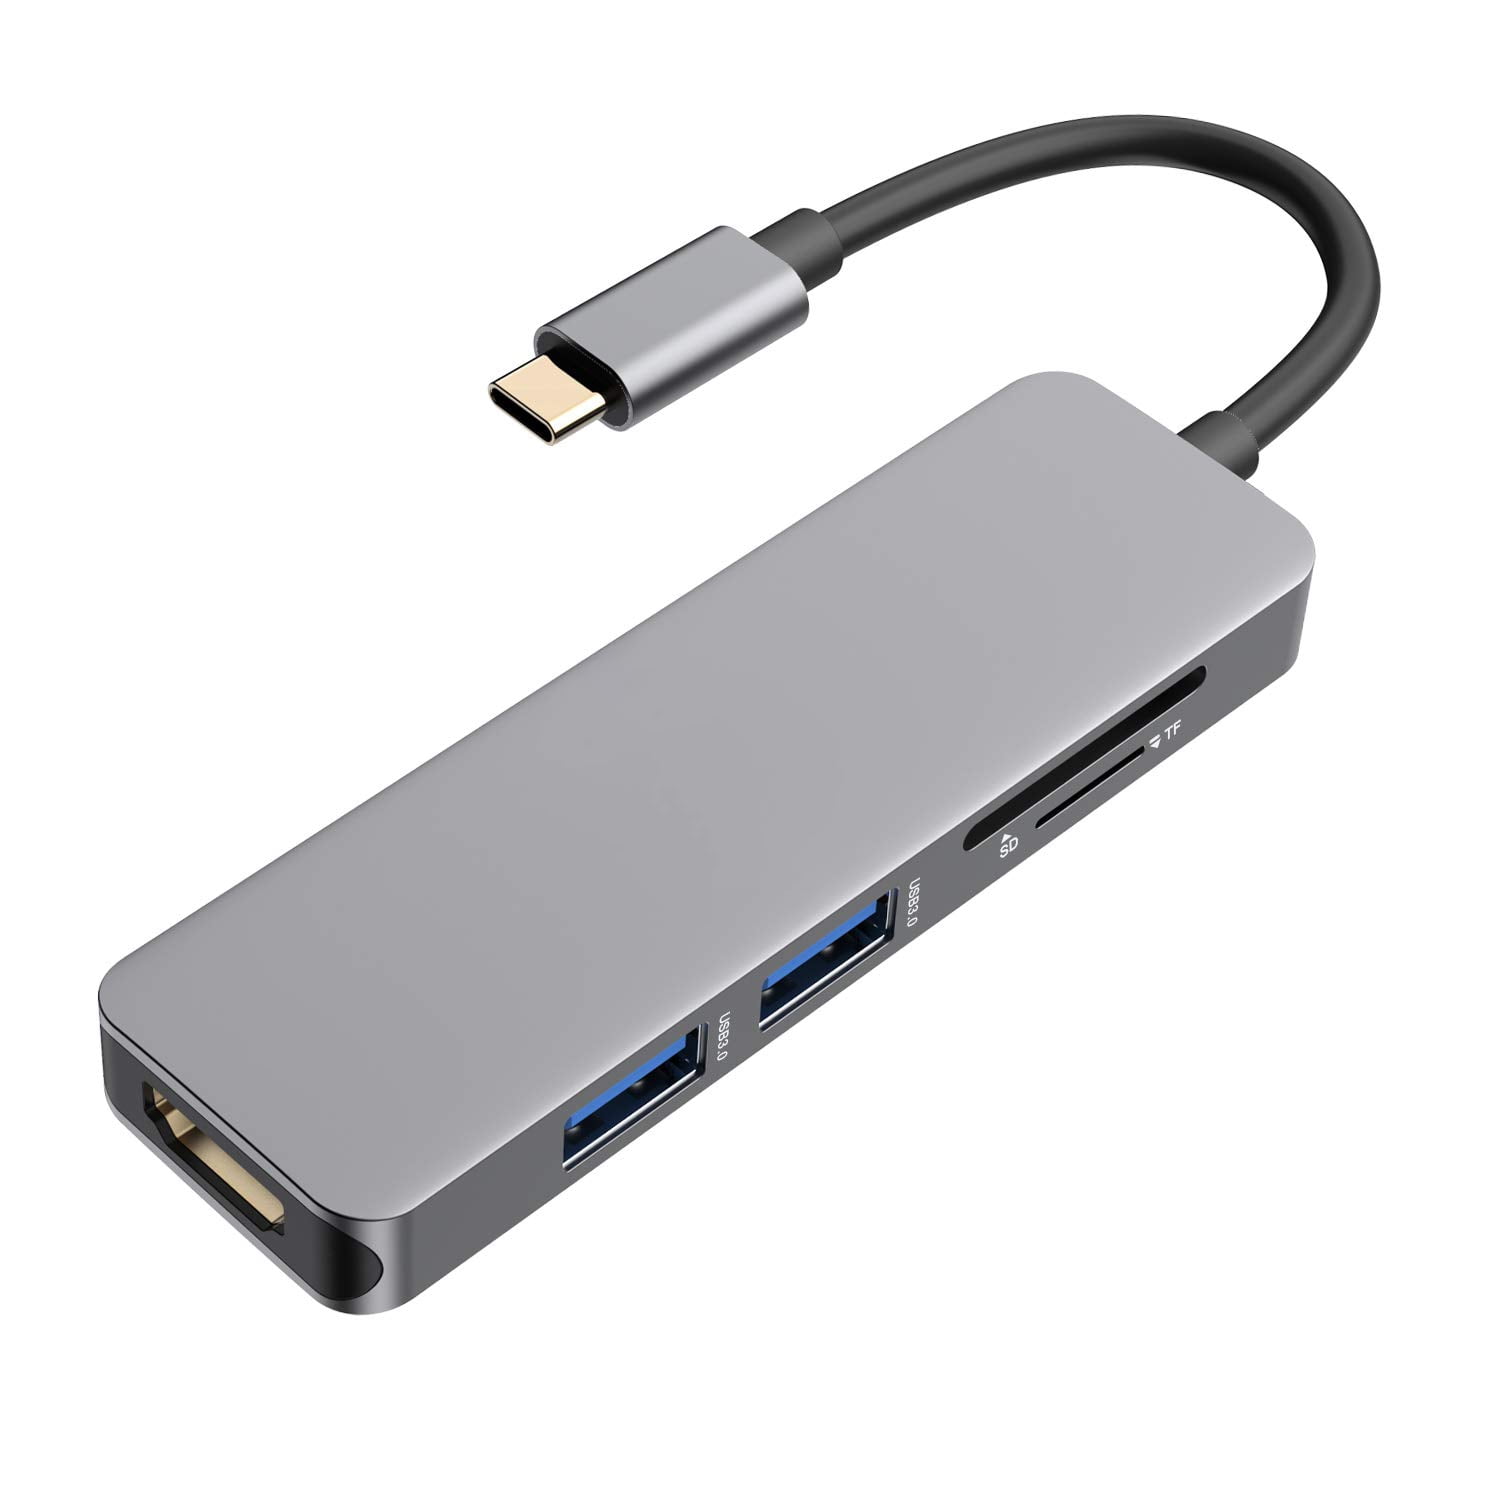 USB C Hub for MacBook Pro 2018 2017 2016 13 15 and MacBook Air 2018 Type-C and PD Power Delivery Charging Port SD TF Card Reader AZLink Thunderbolt 3 USB-C Dock Adapter with HDMI 4K 2 USB 3.0